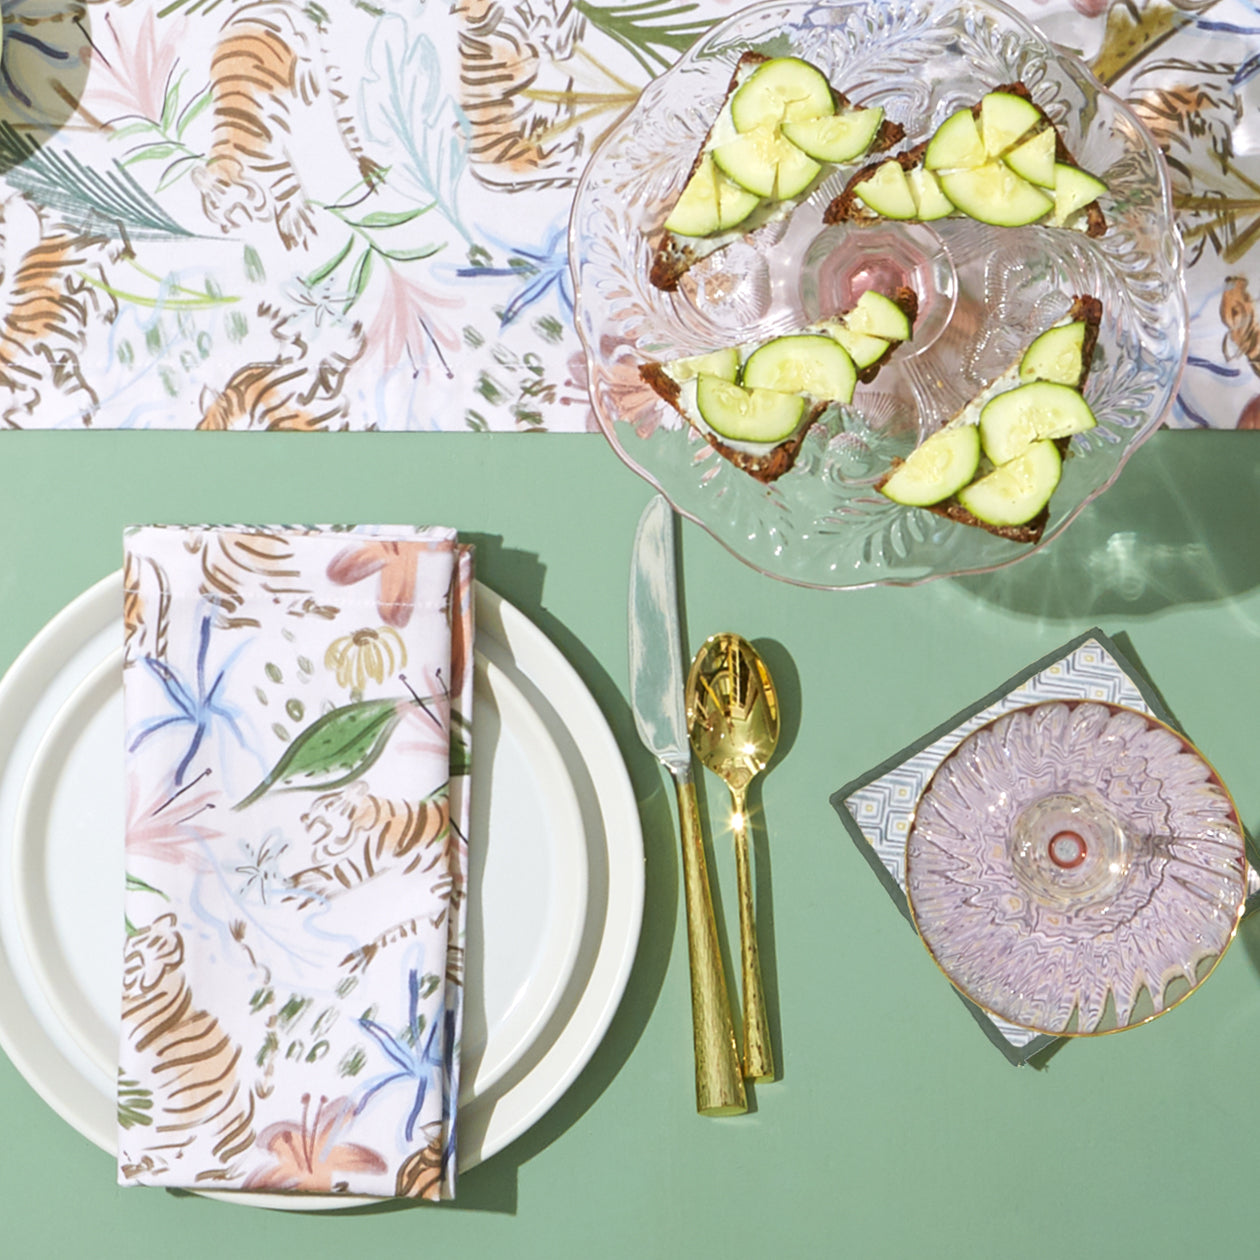 Table setting close-up with white plated and gold silverware styled with Pink Chinoiserie Tiger Printed Table runner and Pink Chinoiserie Tiger Printed Napkin